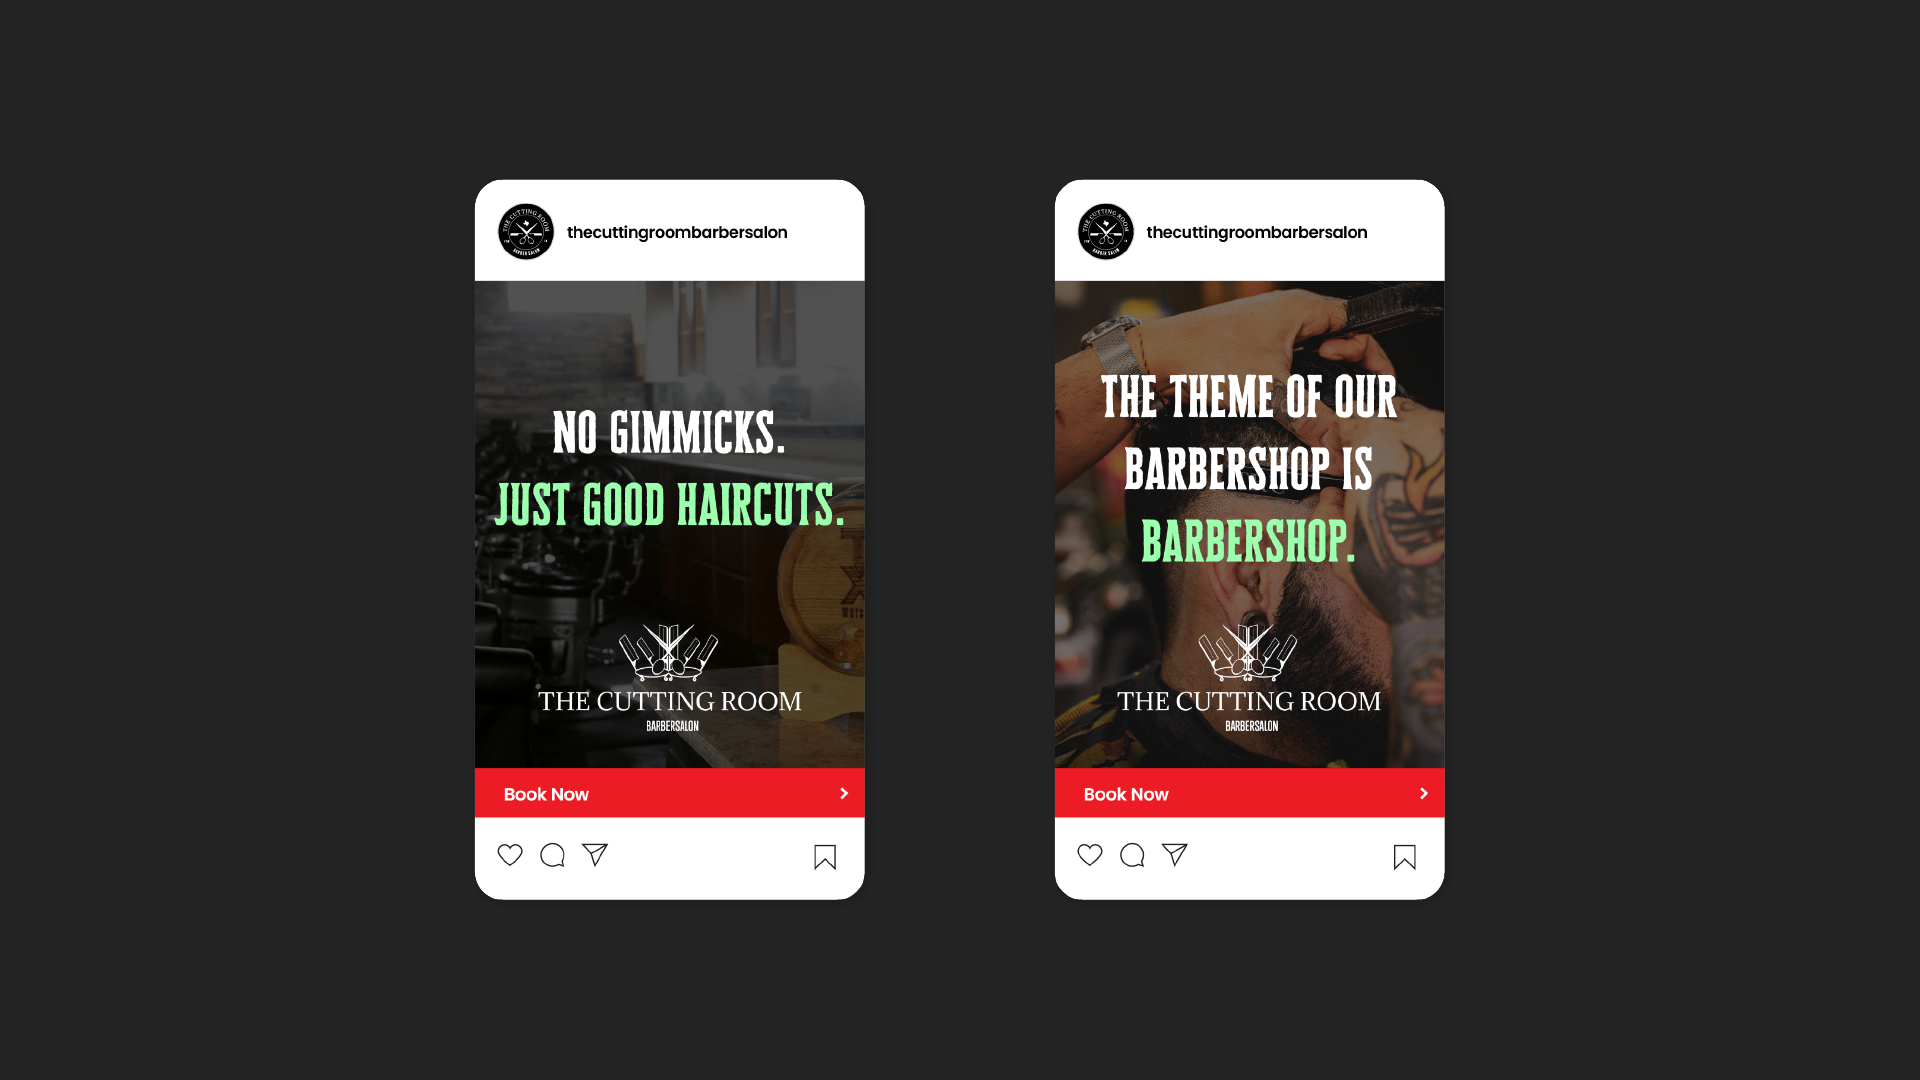 Two social media ad concepts sit side by side. The first says, “No gimmicks. Just good haircuts.” The second says, “The theme of our barbershop is barbershop.”